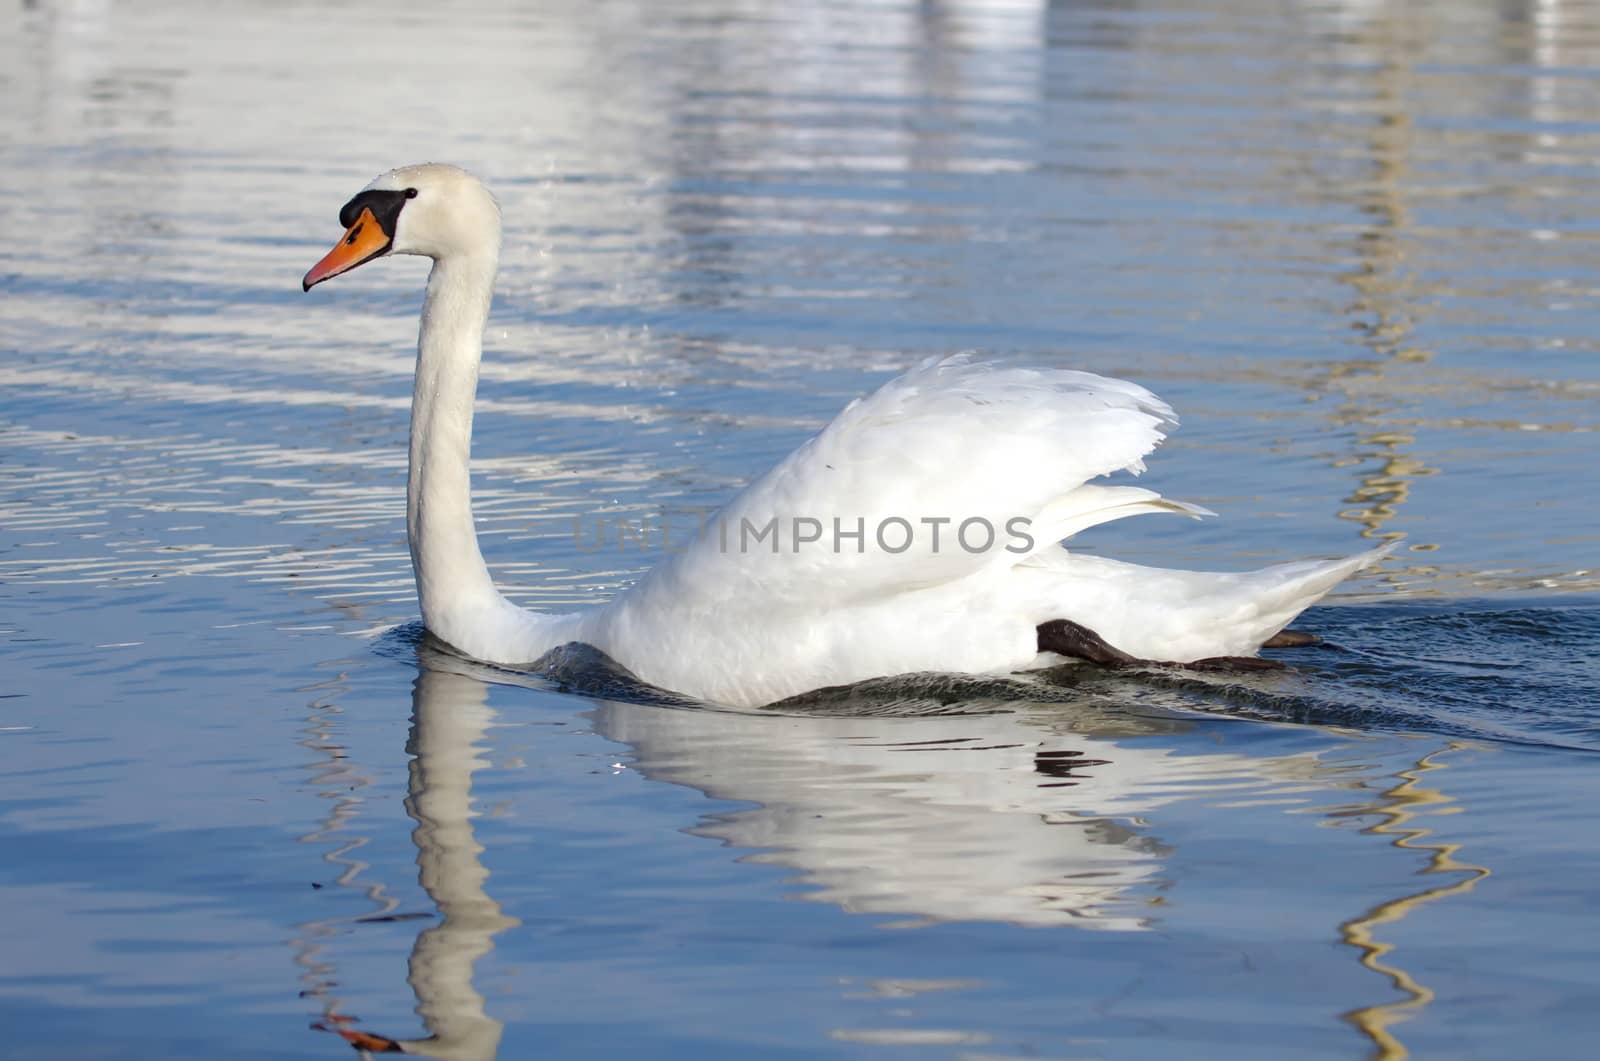 One mute swan with open wings floating quietly on blue water